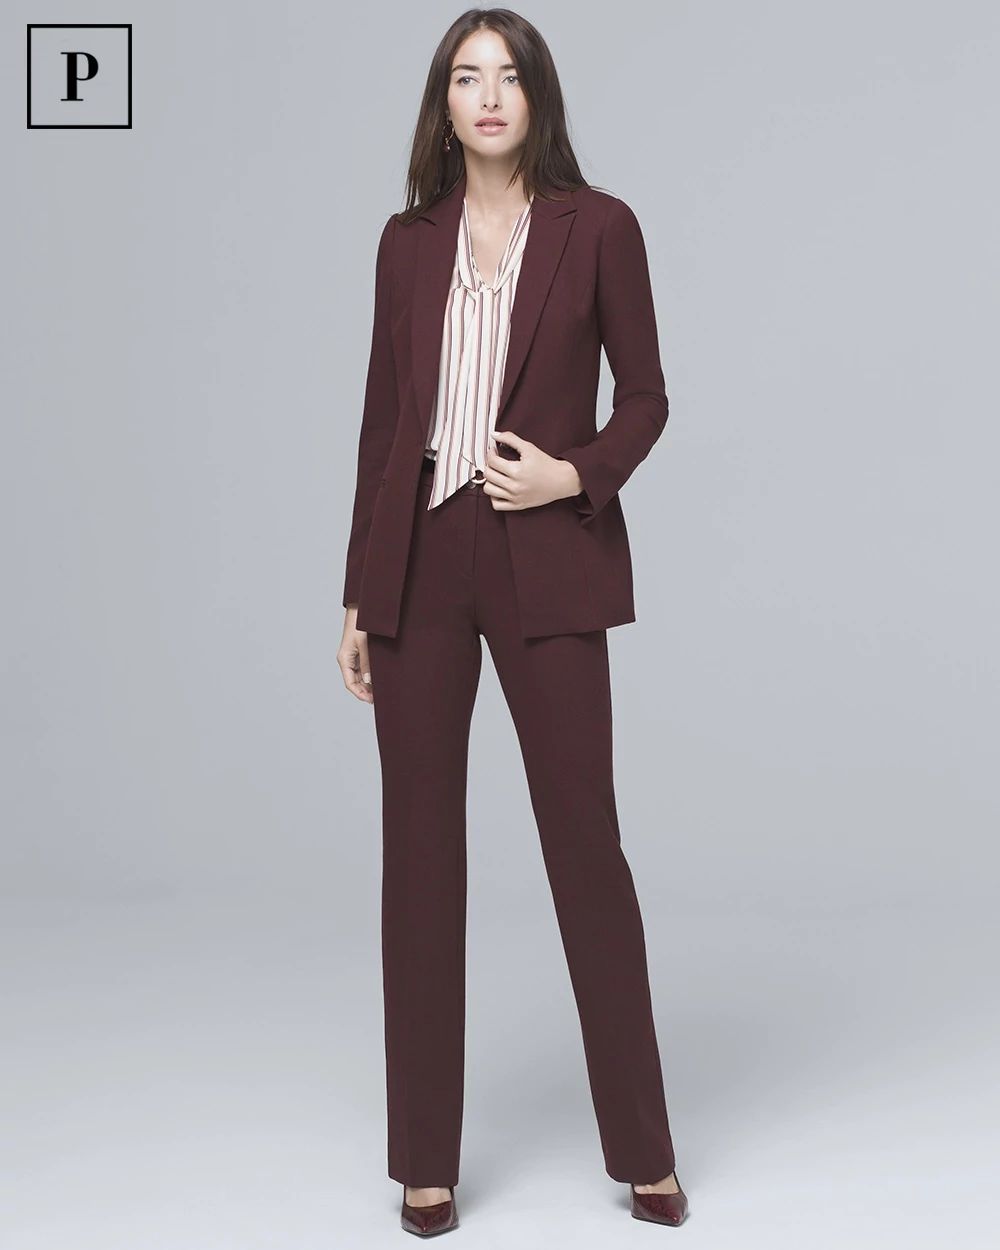 Petite Luxe Suiting Bootcut Pants click to view larger image.